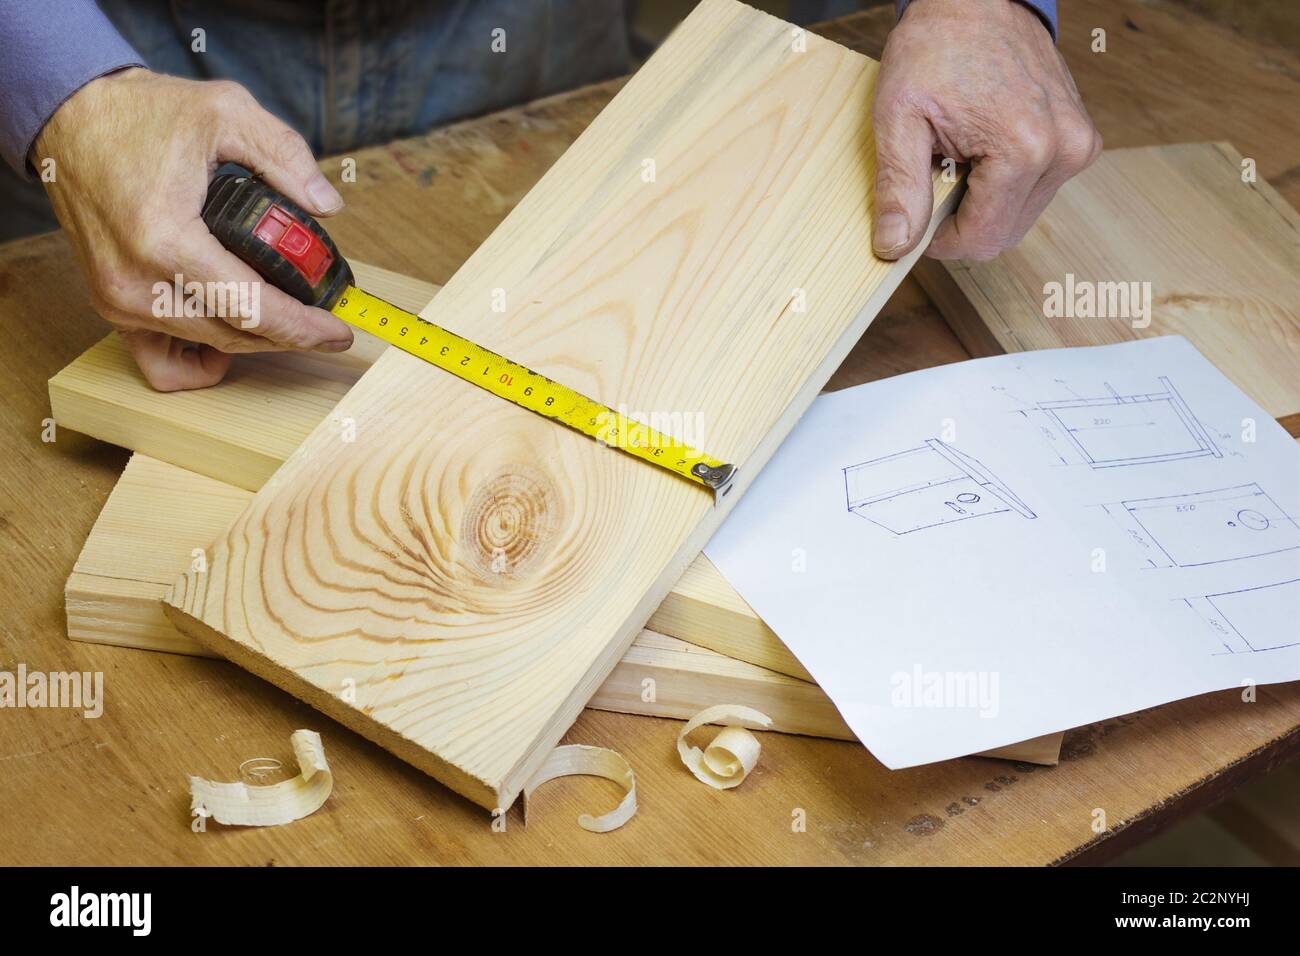 Carpenter makes a birdhouse in the workshop by sketch Stock Photo